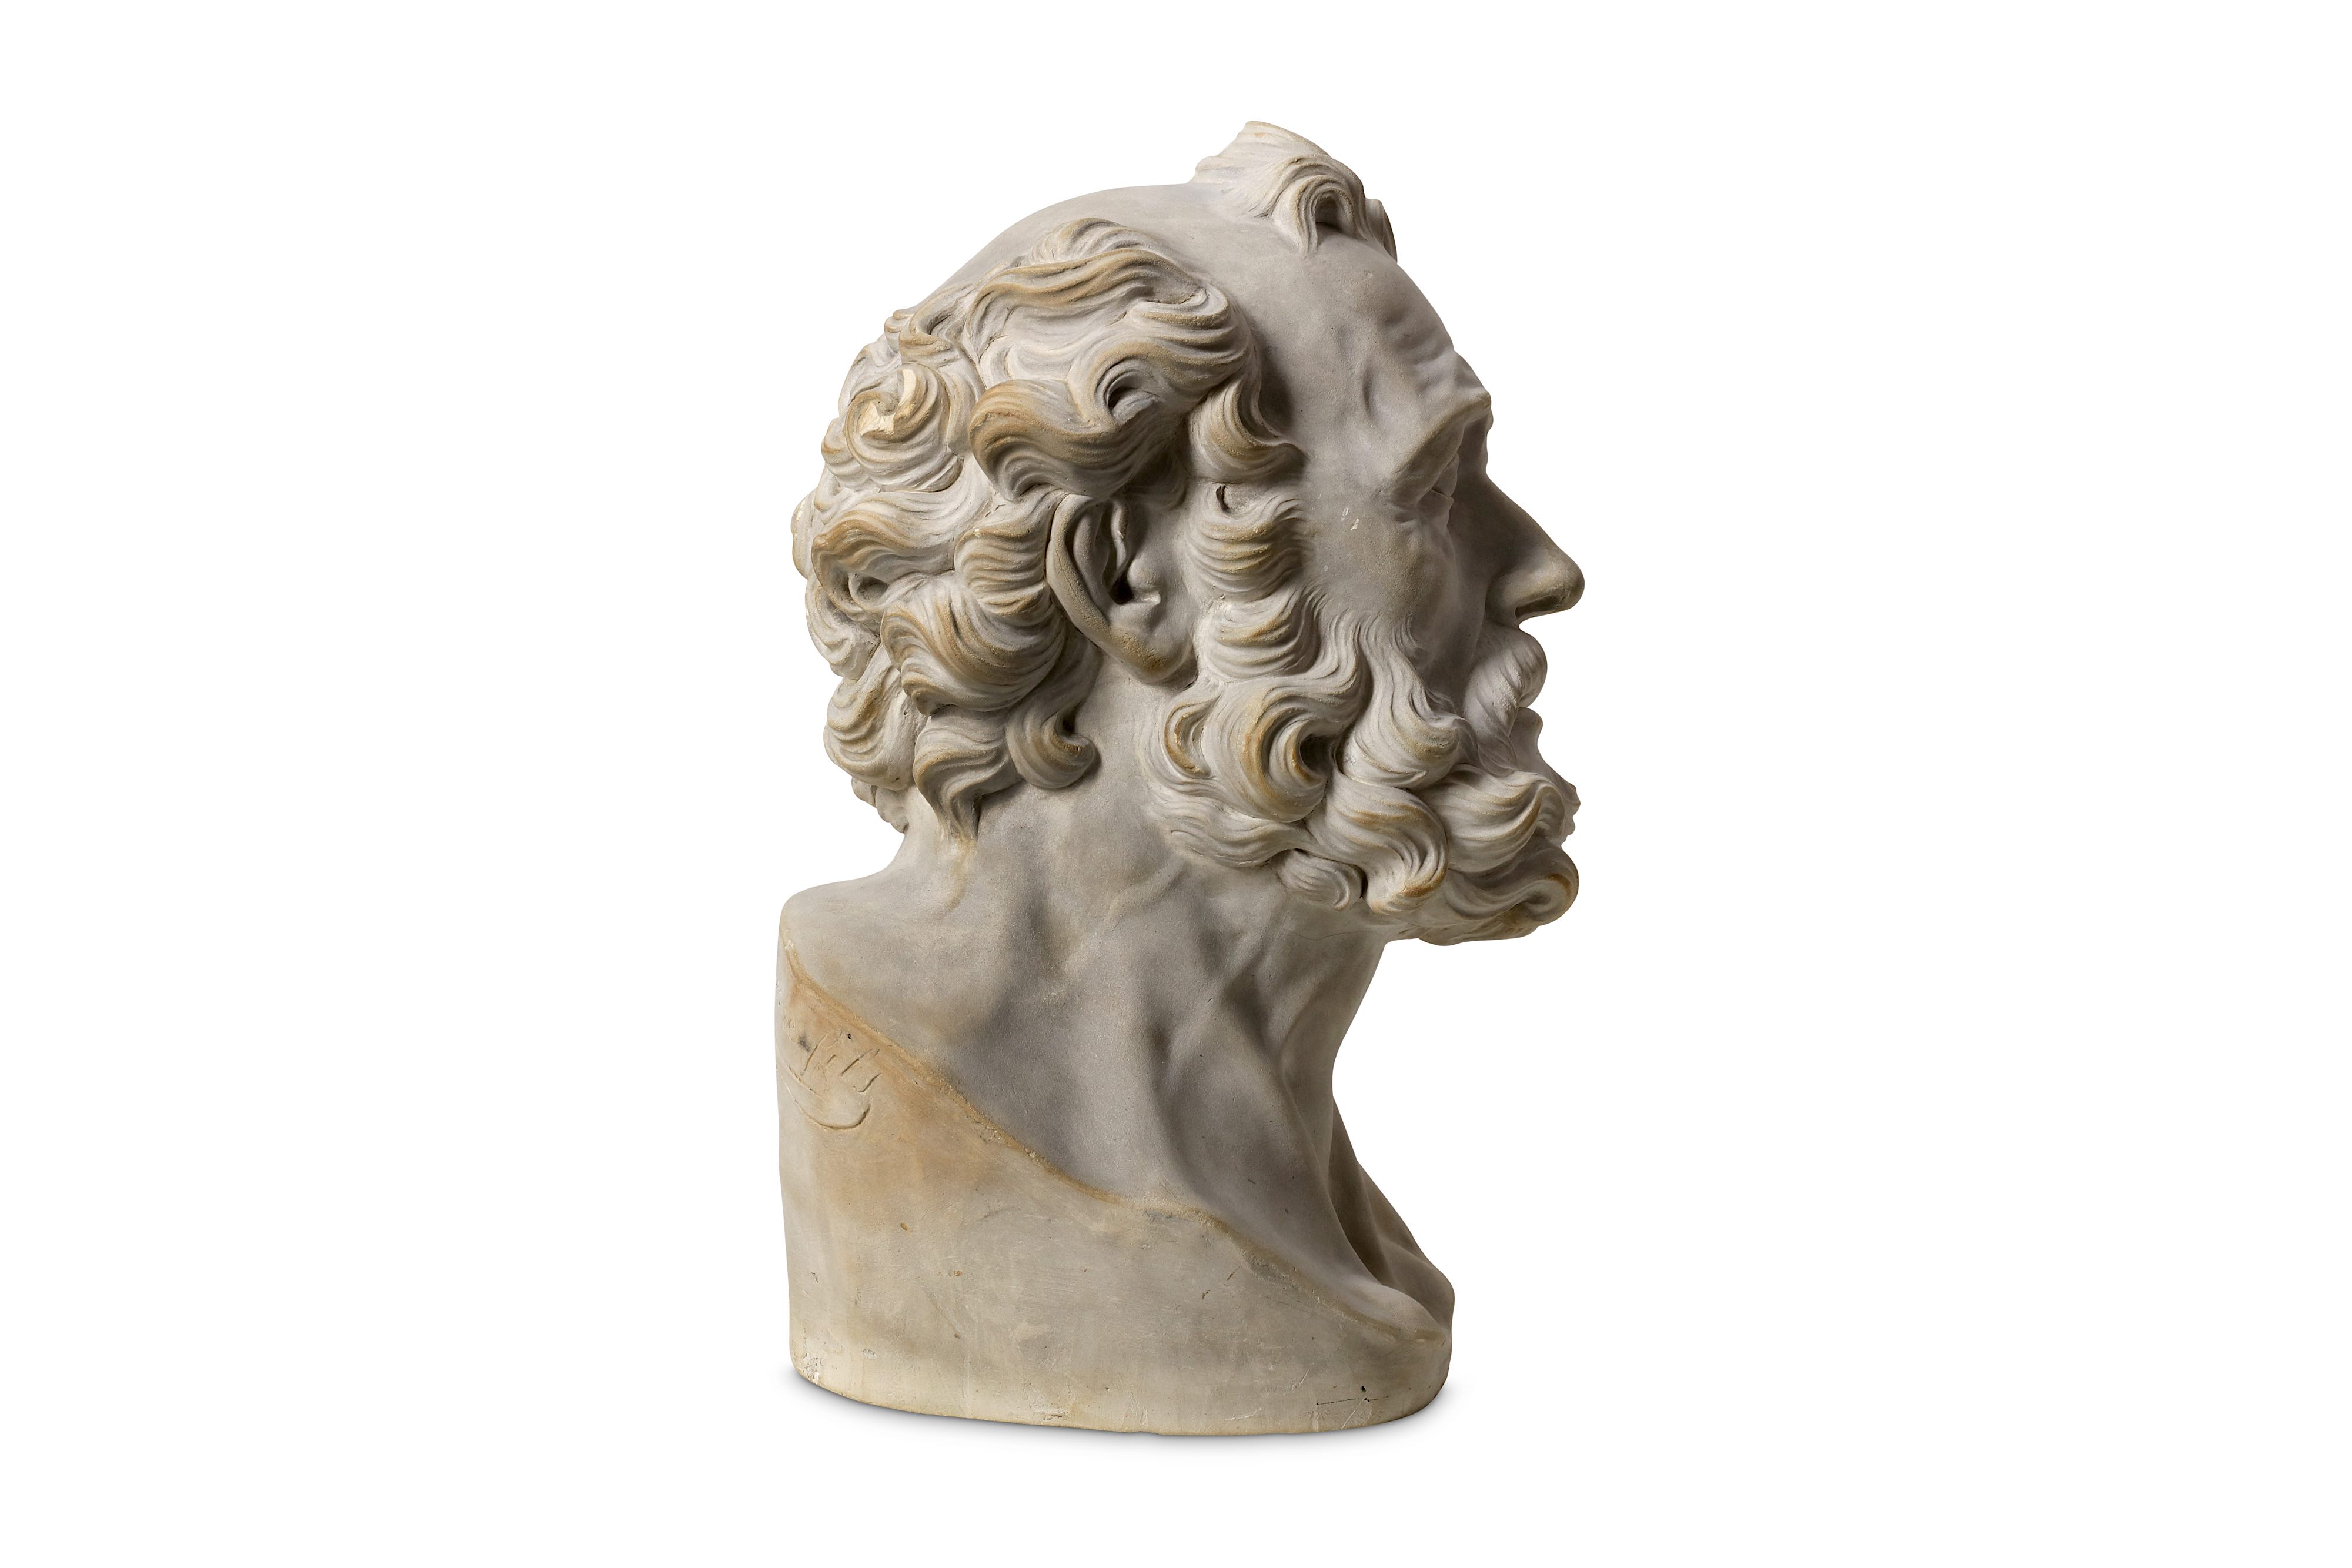 AFTER ALESSANDRO ALGARDI (ITALIAN, 1598-1654): A CLAY HEAD OF ST PIERRE SIGNED 'ETIENNE FILS 1818' - Image 2 of 6